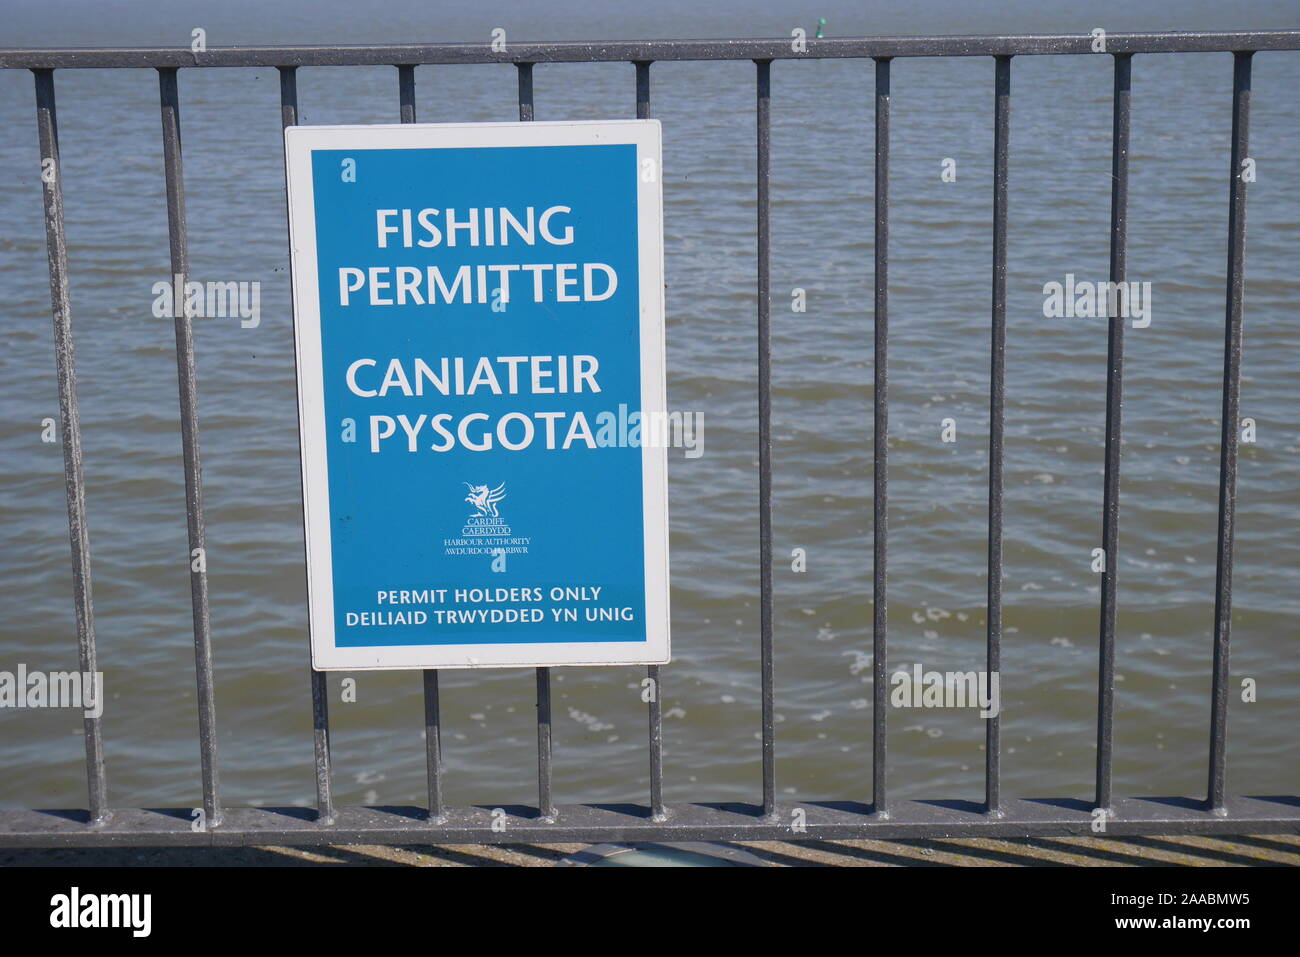 Bilingual sign on railings in English and Welsh saying Fishing Permitted and No Fishing, Cardiff Bay Barrage, Cardiff, Wales, United Kingdom Stock Photo